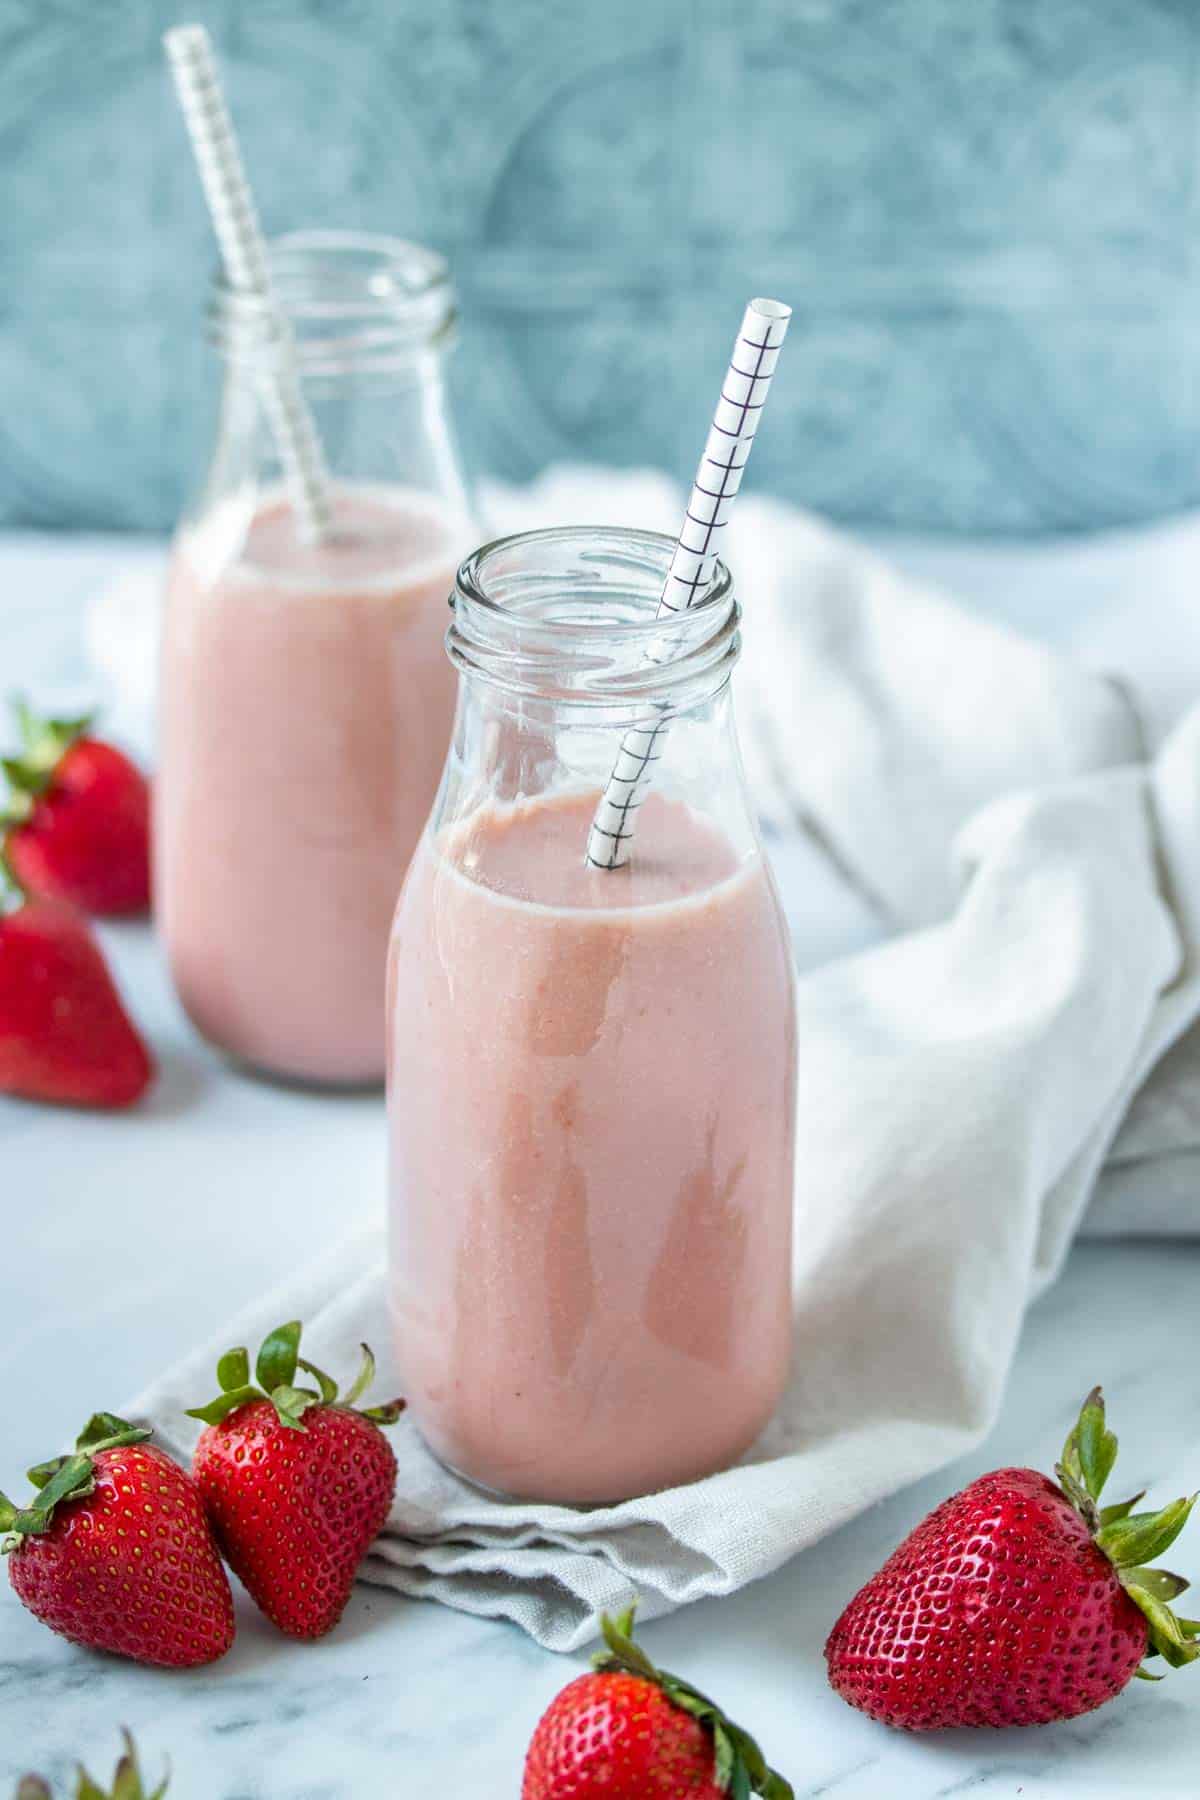 Homemade vegan strawberry milk in a glass jar with a red and white straw